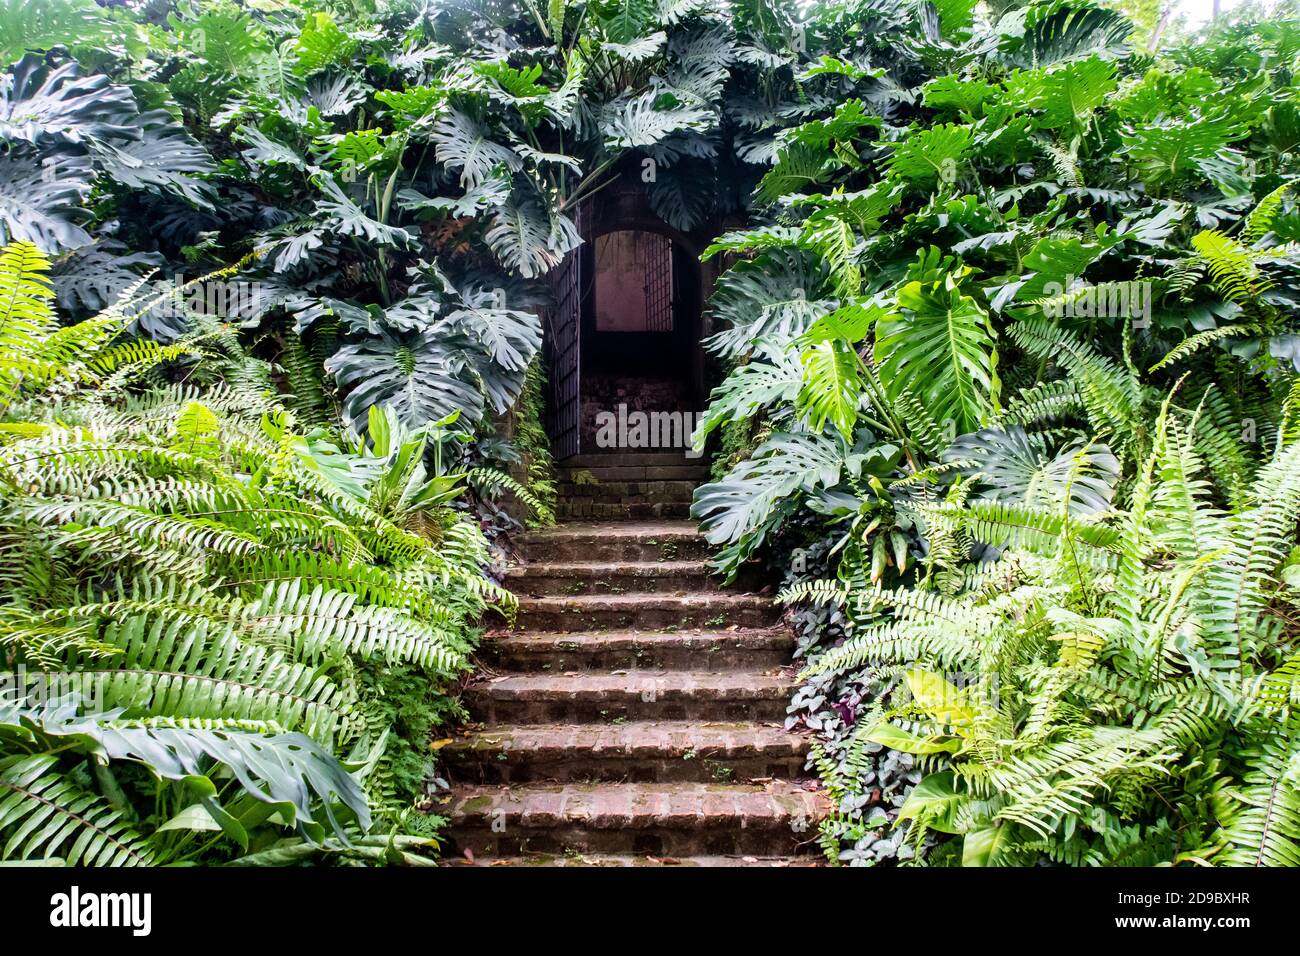 Secret doors with stone stairs surrounded by dense fern and monstera (Monstera deliciosa) green leaves, hidden entrance to the bunker in Fort Canning Stock Photo